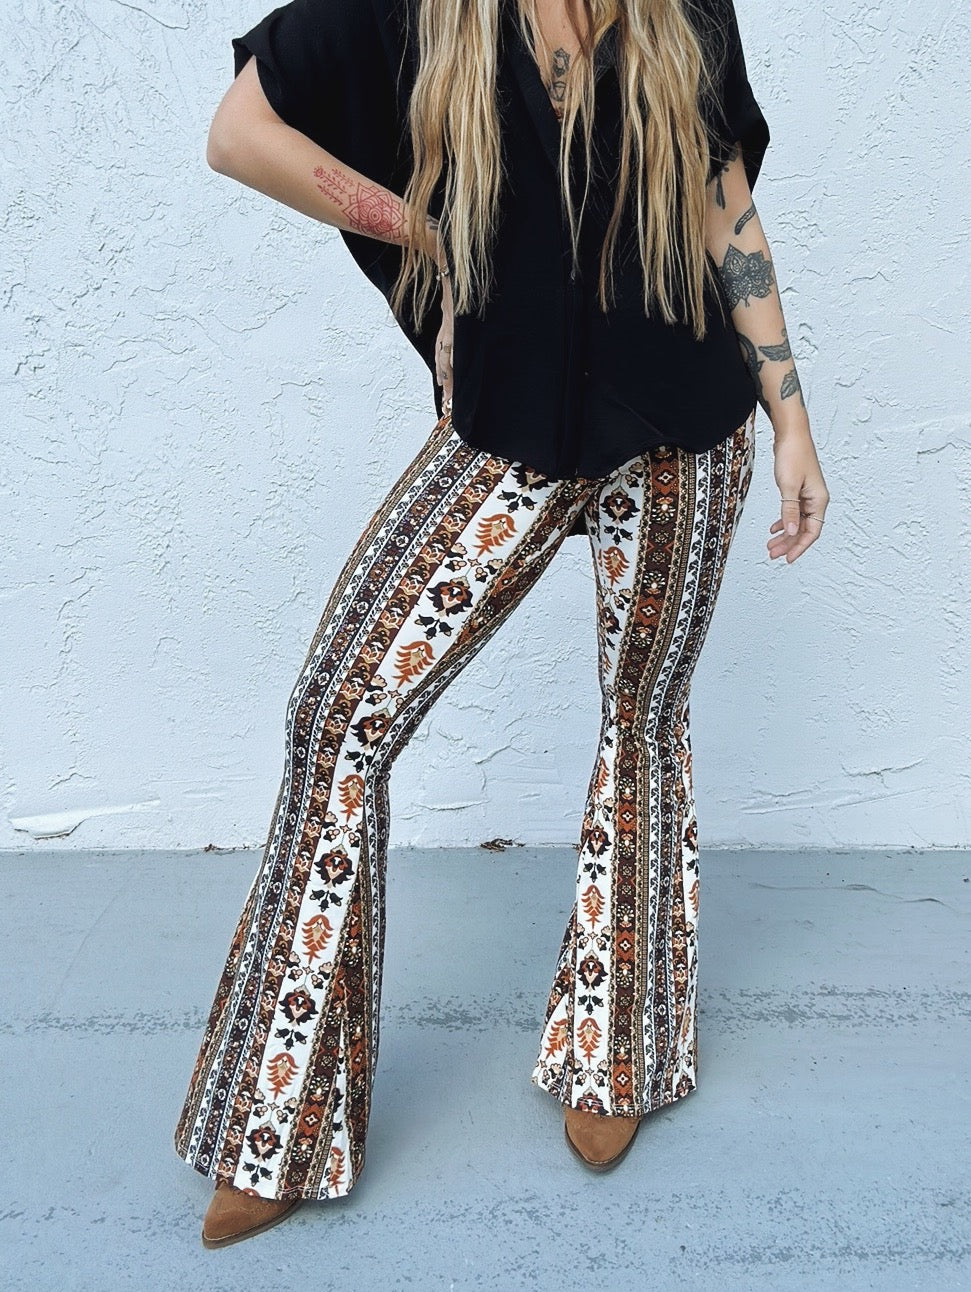 Band Of Gold Boho Floral Print Bell Bottom Flare Pants - Lil Bee's Bohemian